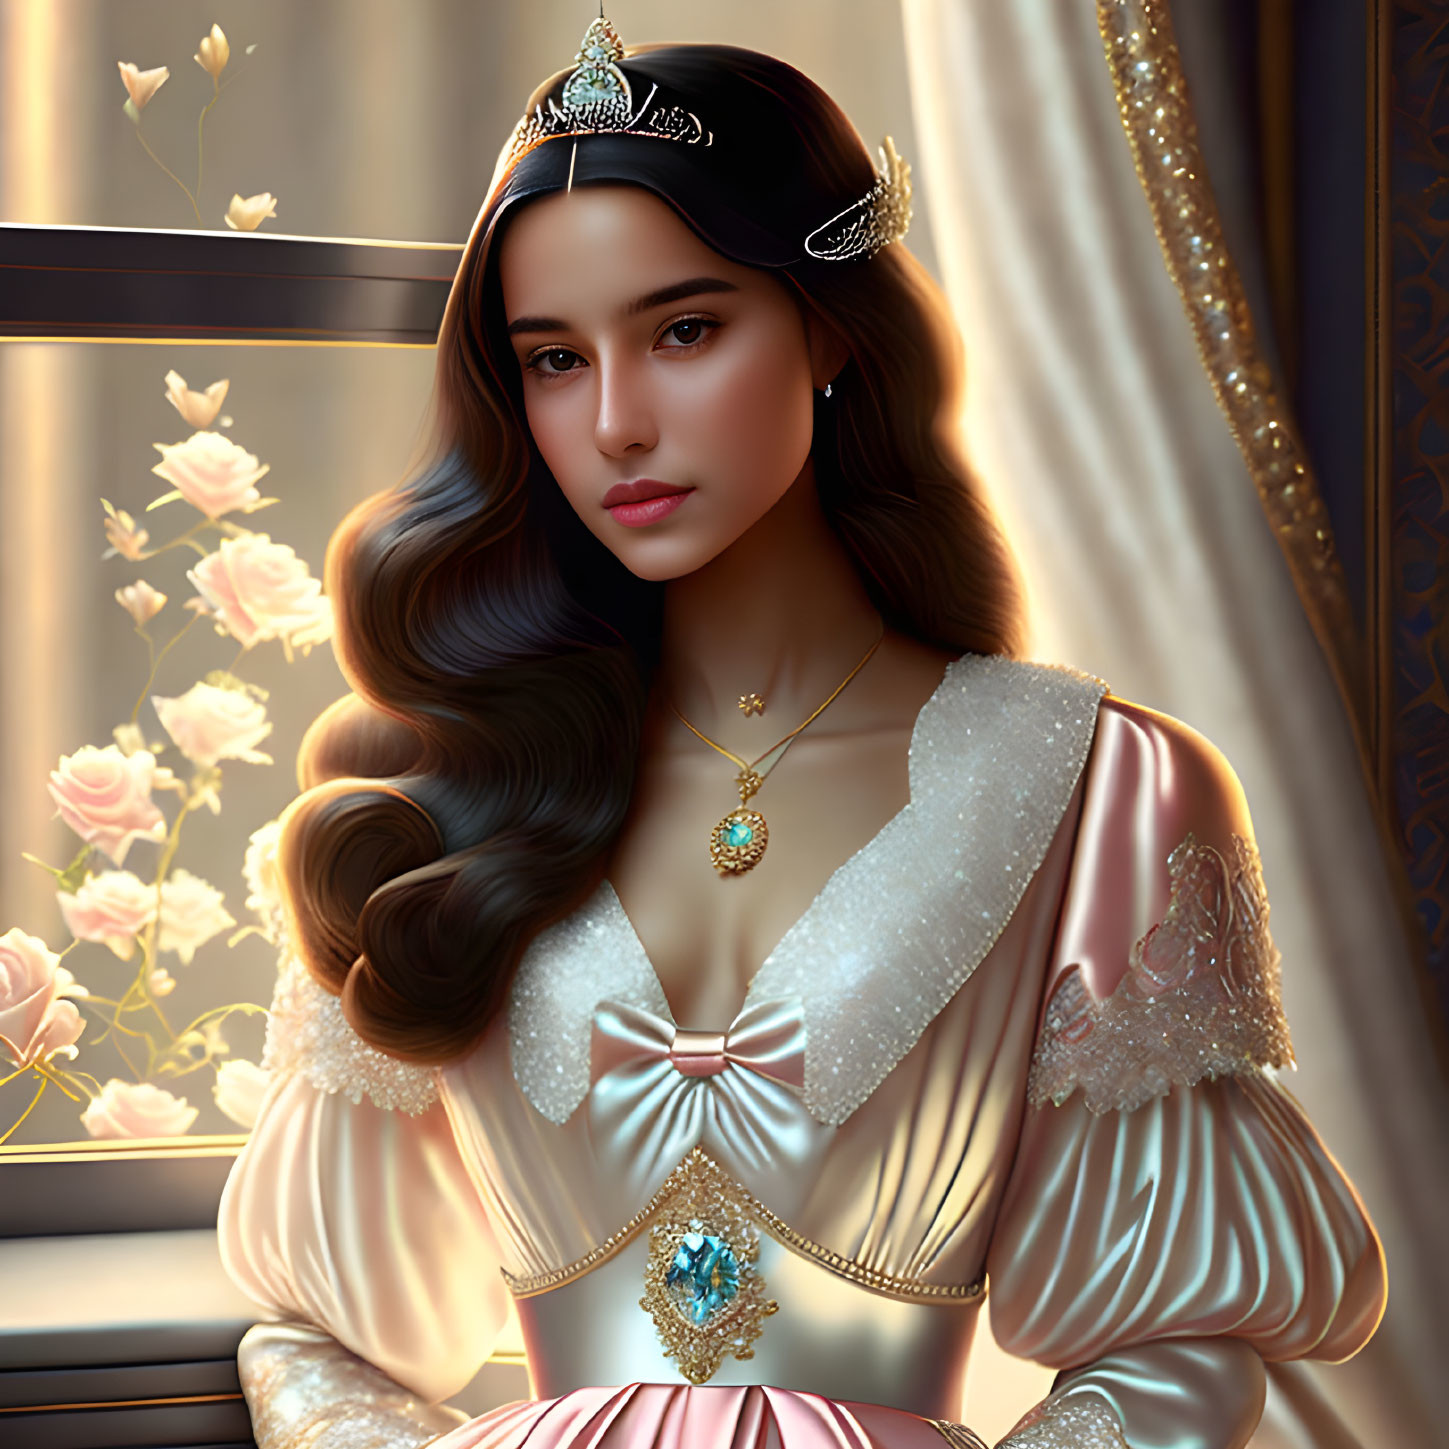 Illustrated Woman with Wavy Hair and Jeweled Headband in Golden Dress by Window with Roses